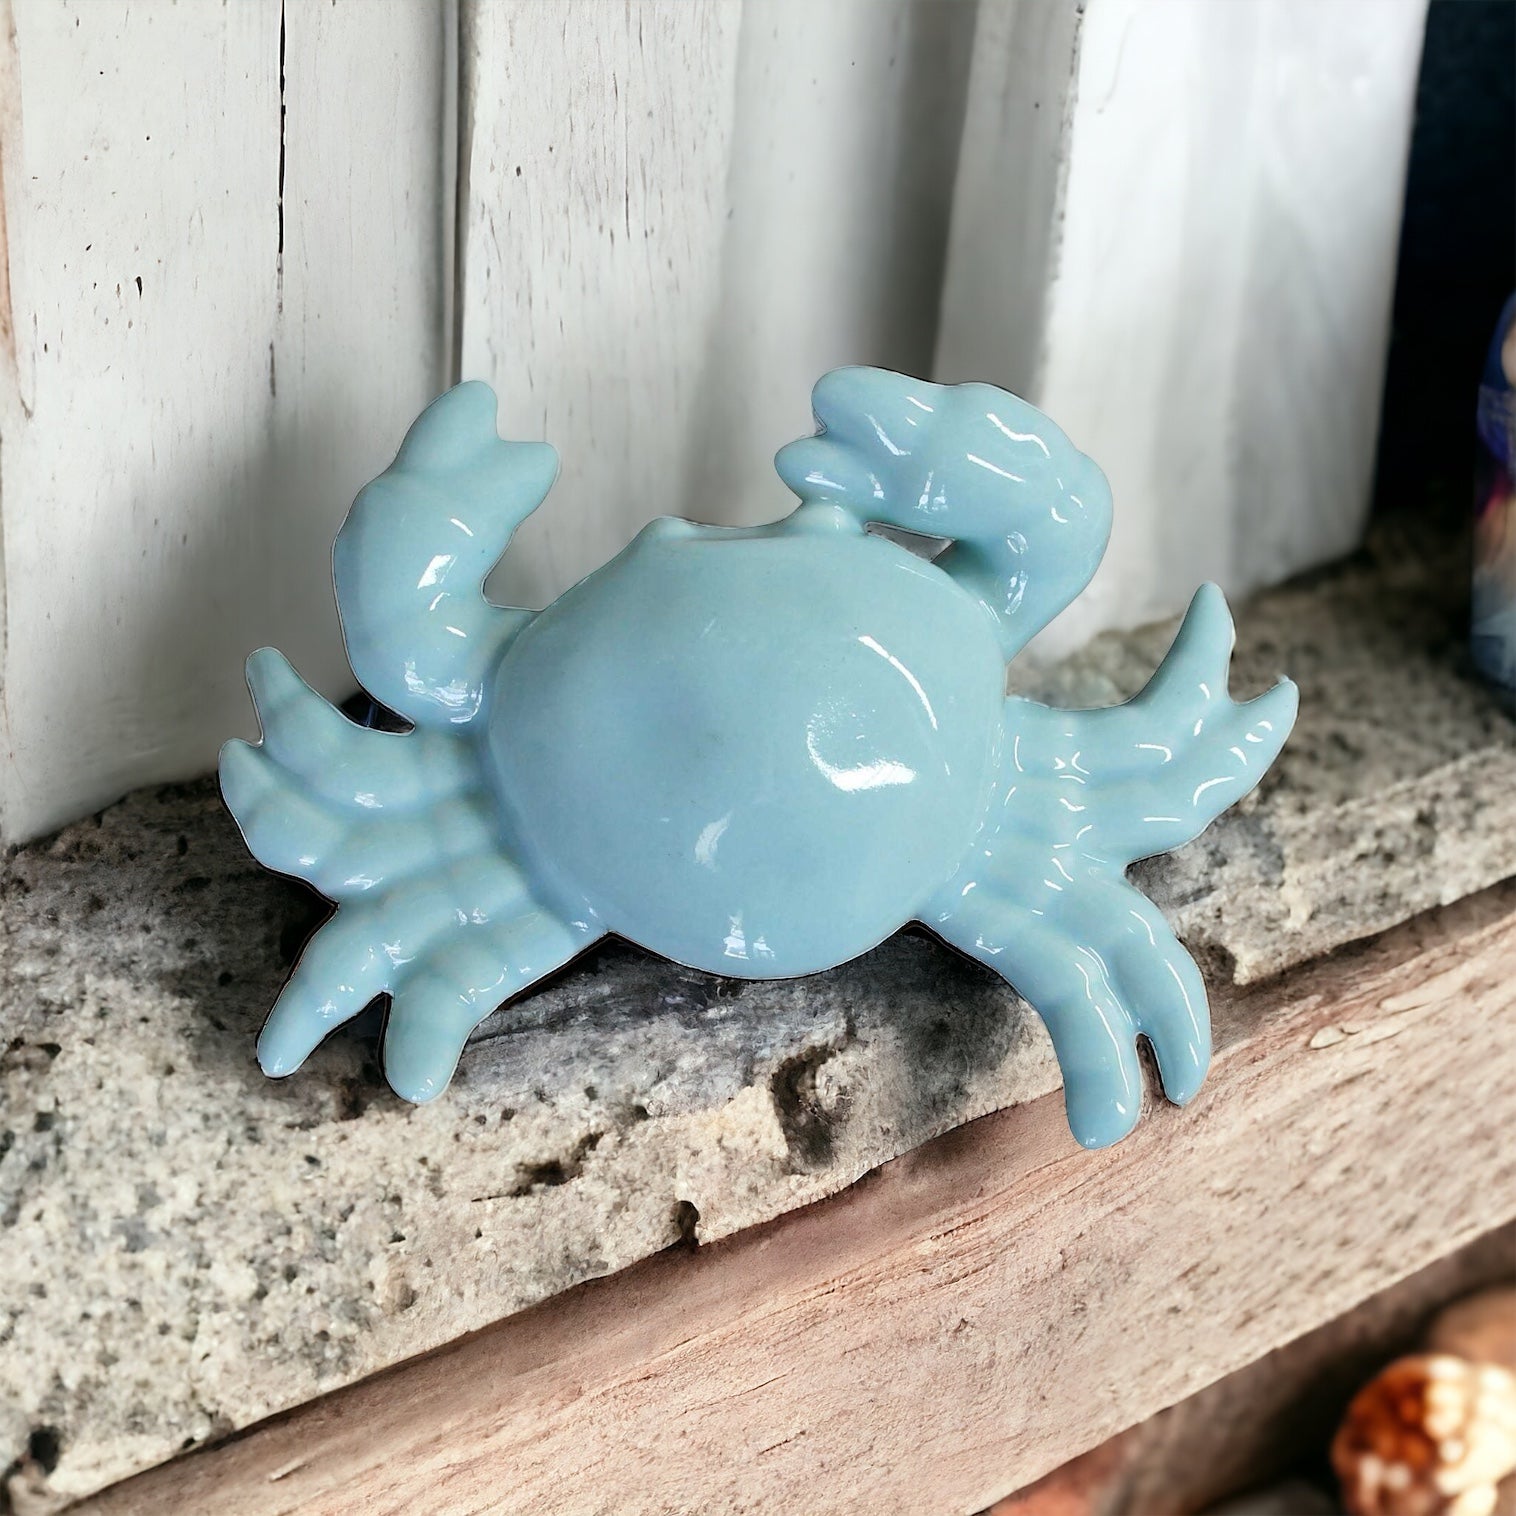 Crab Light Blue Ocean Ornament - The Renmy Store Homewares & Gifts 